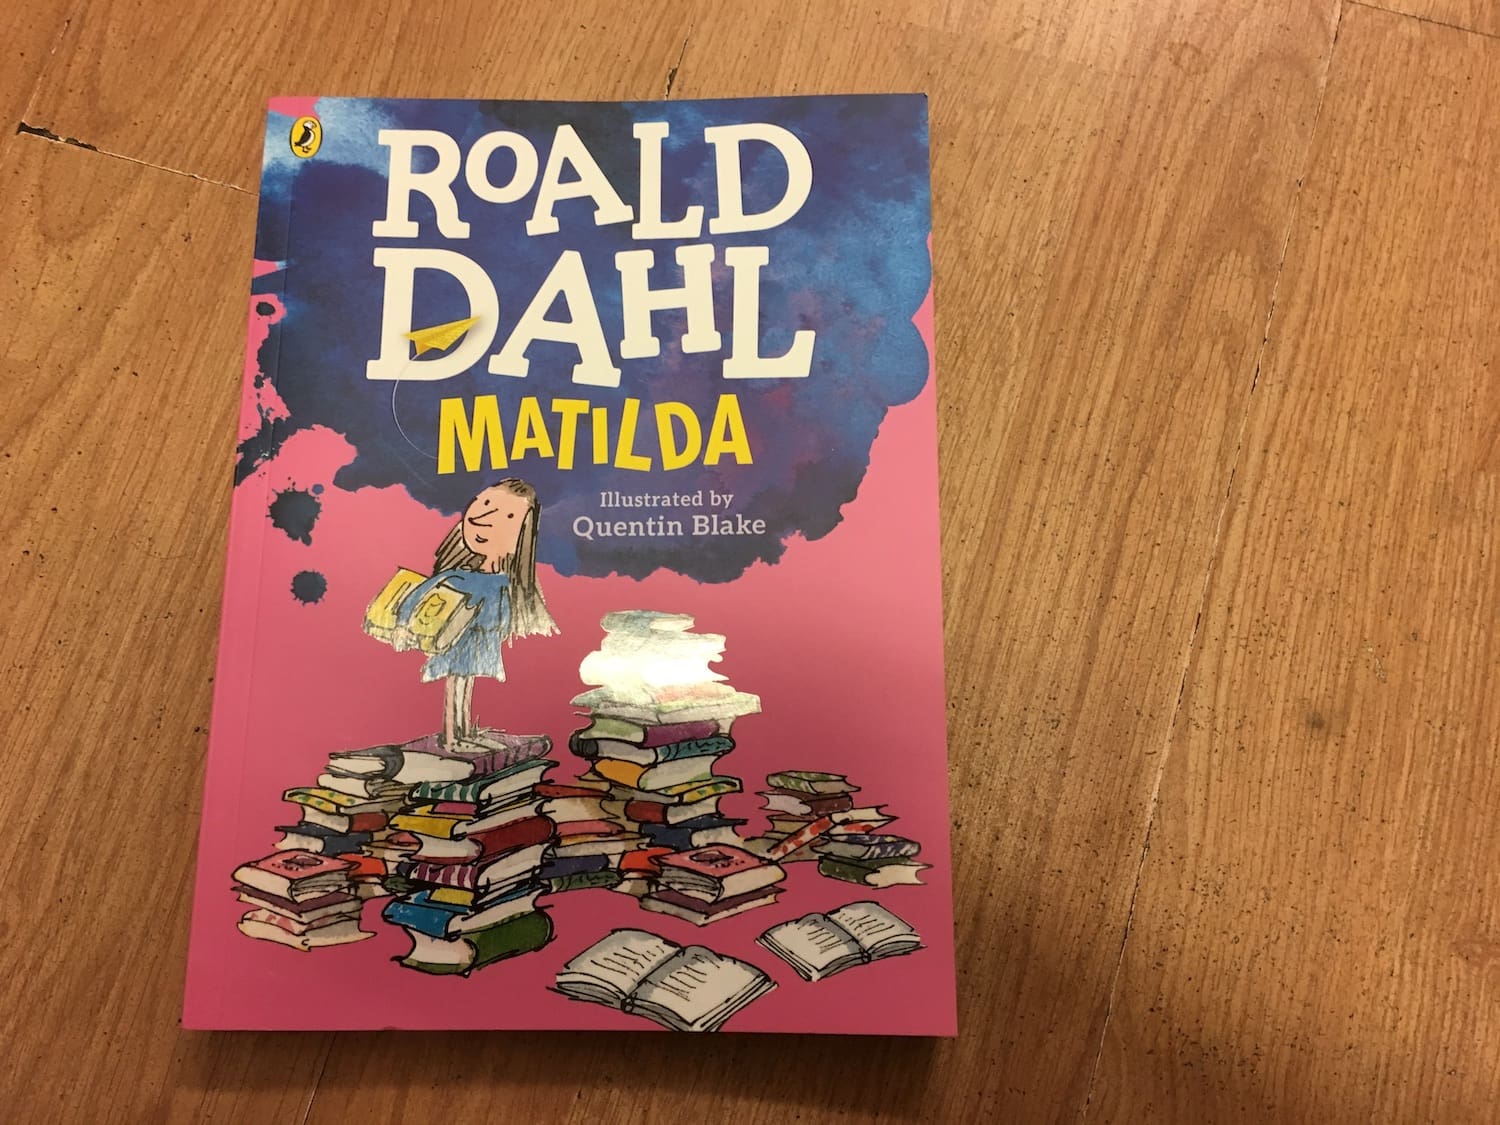 Featured image for “Enter our competition for a chance to win a copy of Matilda”